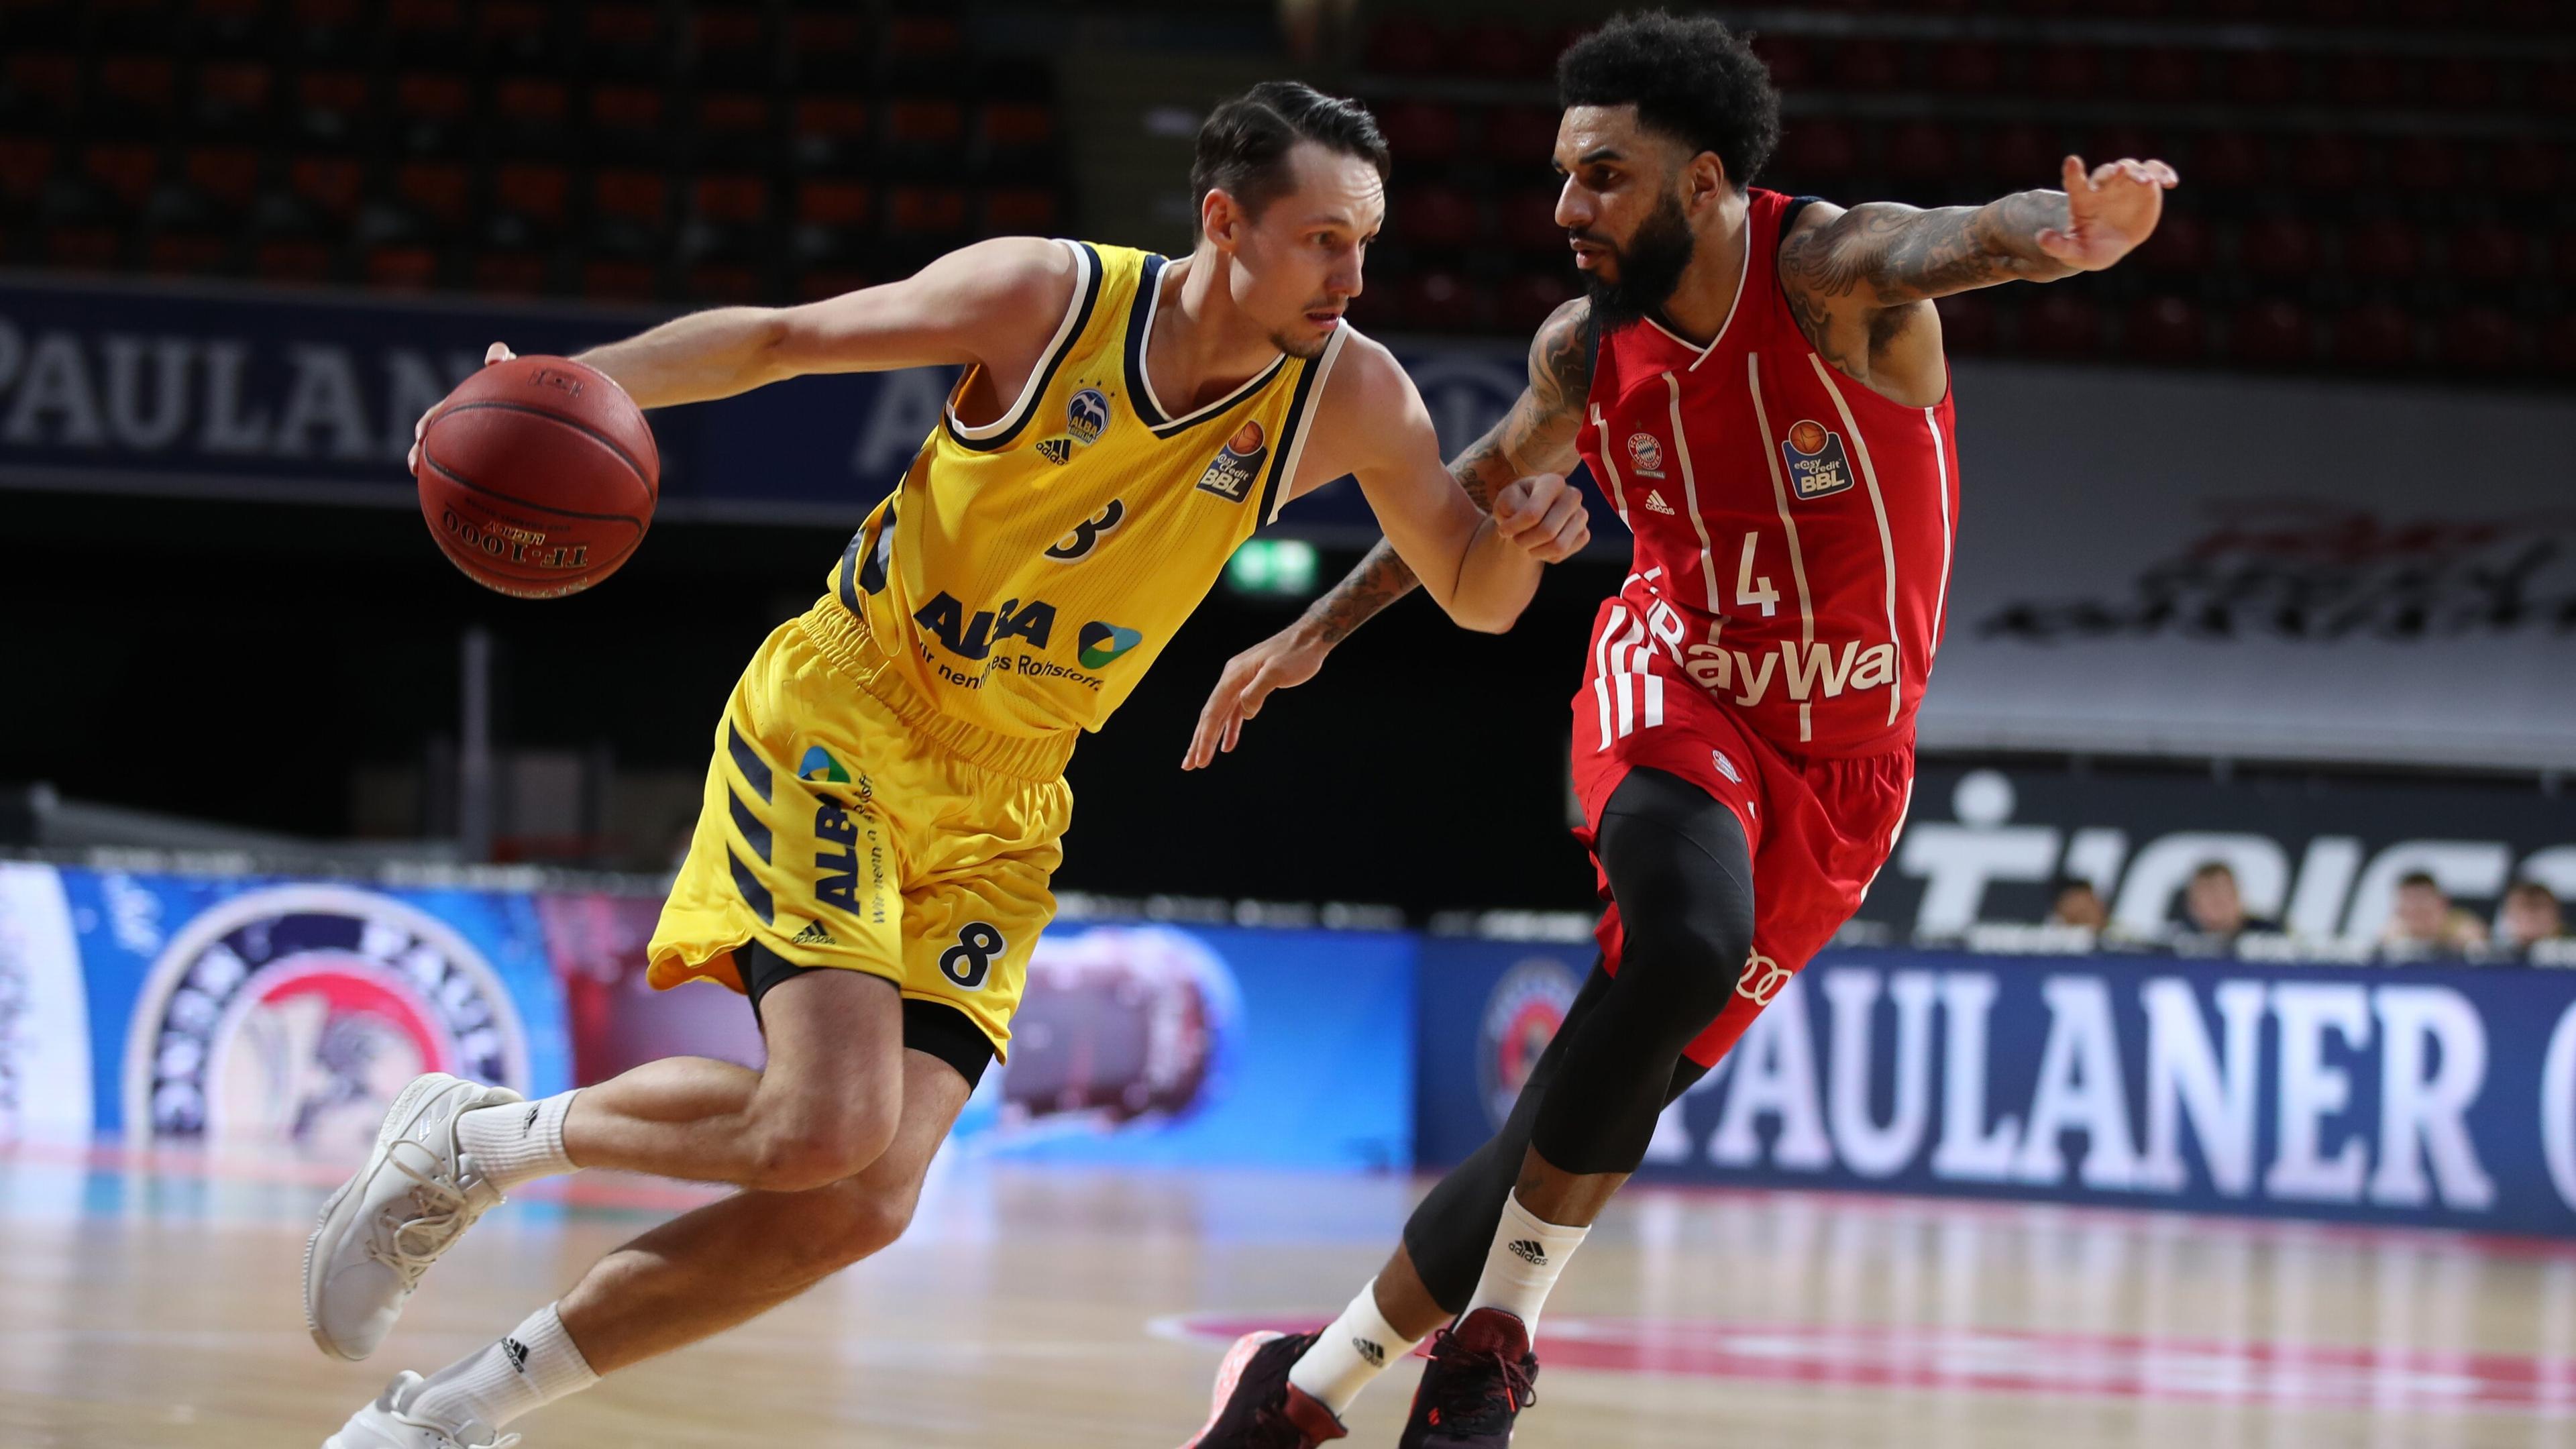 The Finals of the easyCredit BBL are set as reigning champions ALBA BERLIN will face off against MagentaSport BBL German Cup winners FC Bayern Munich for the 2020-21 title starting on Wednesday June 9. Both teams won three straight games for 3-1 semi-finals series wins to set up the fourth match-up of Germany’s two powerhouses in the Finals - with Bayern winning all three previous showdowns.